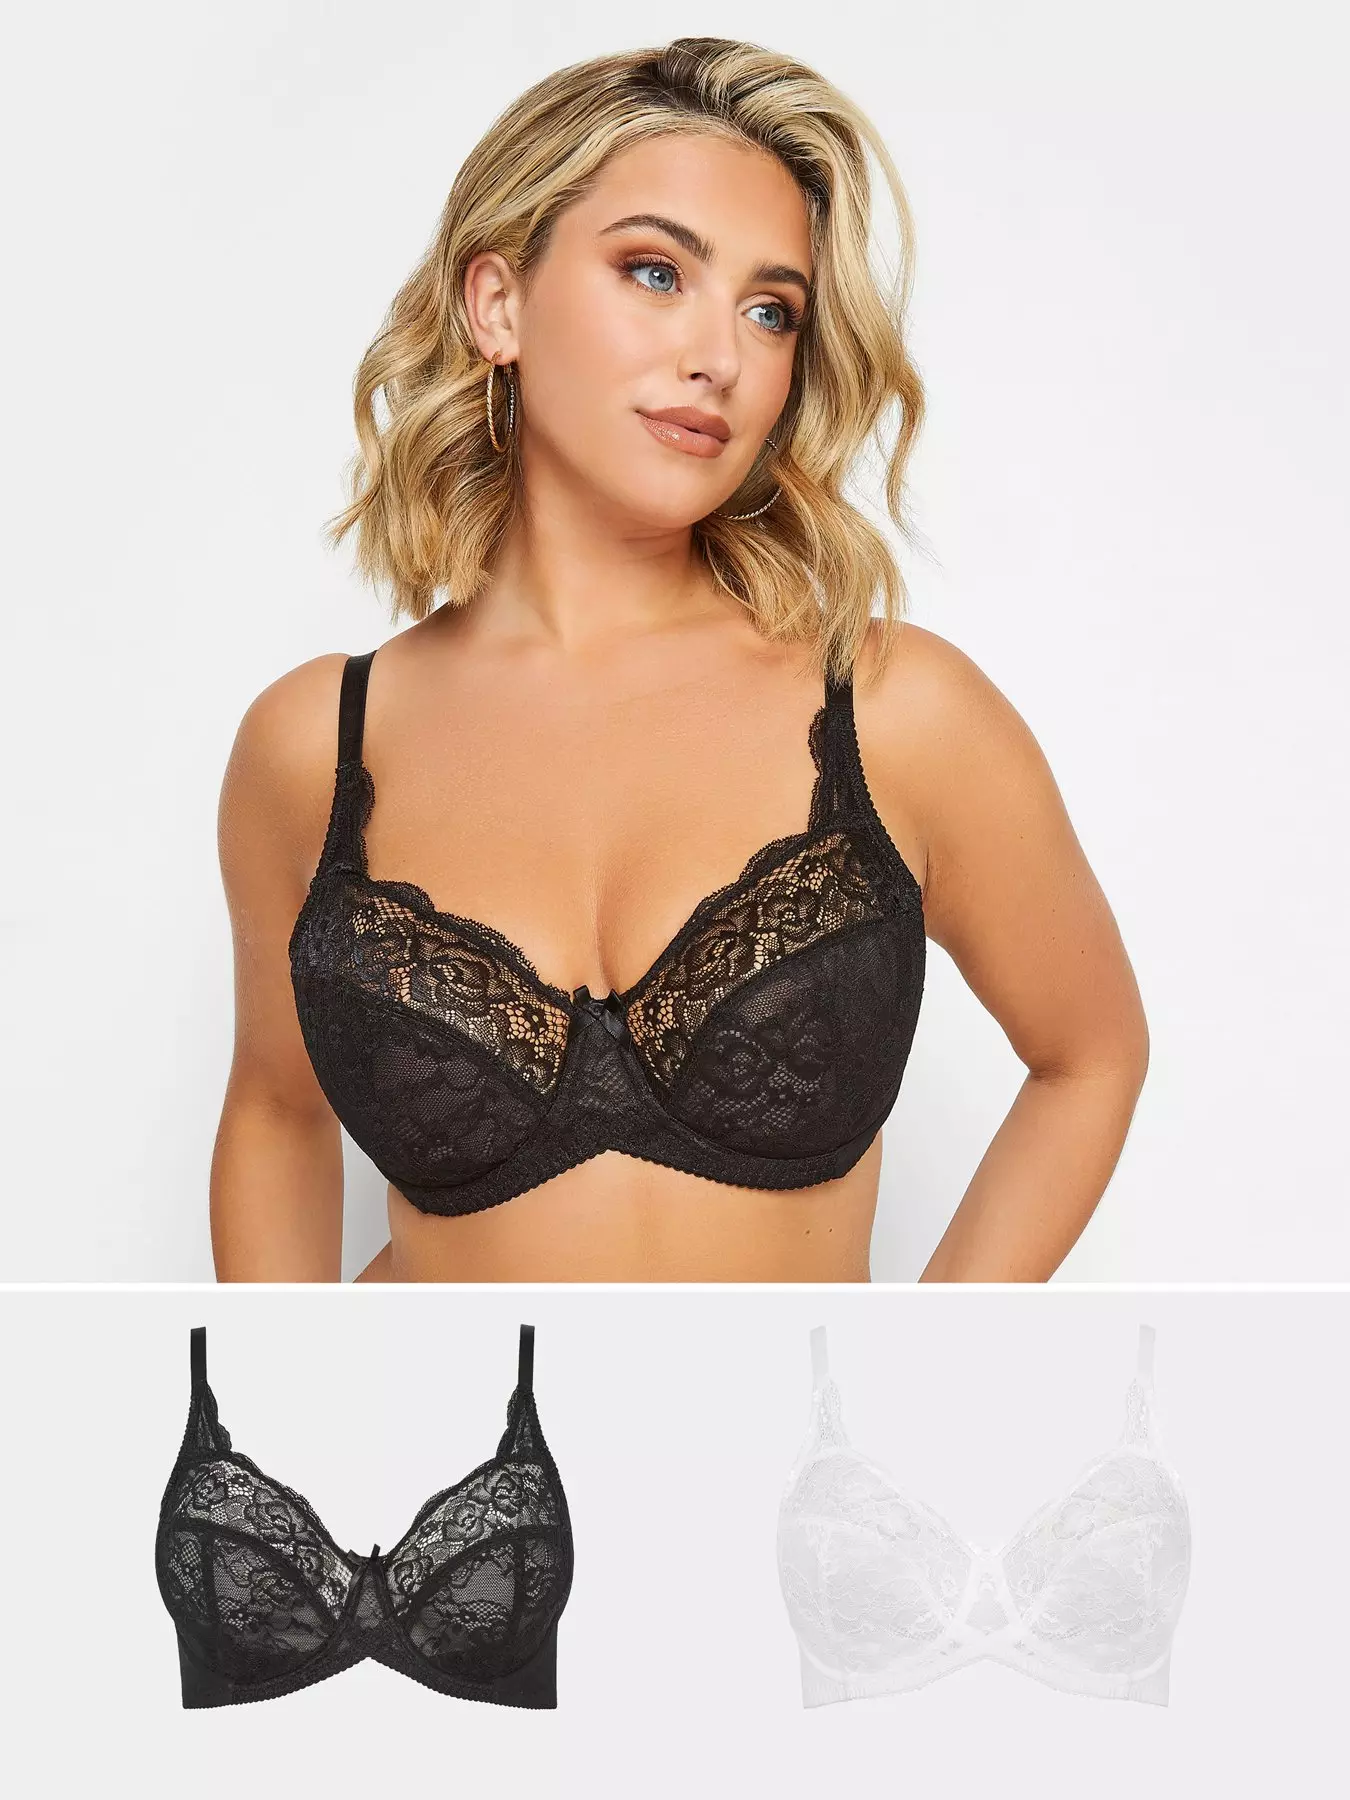 YOURS Curve Plus Size Black Padded T-Shirt Bra